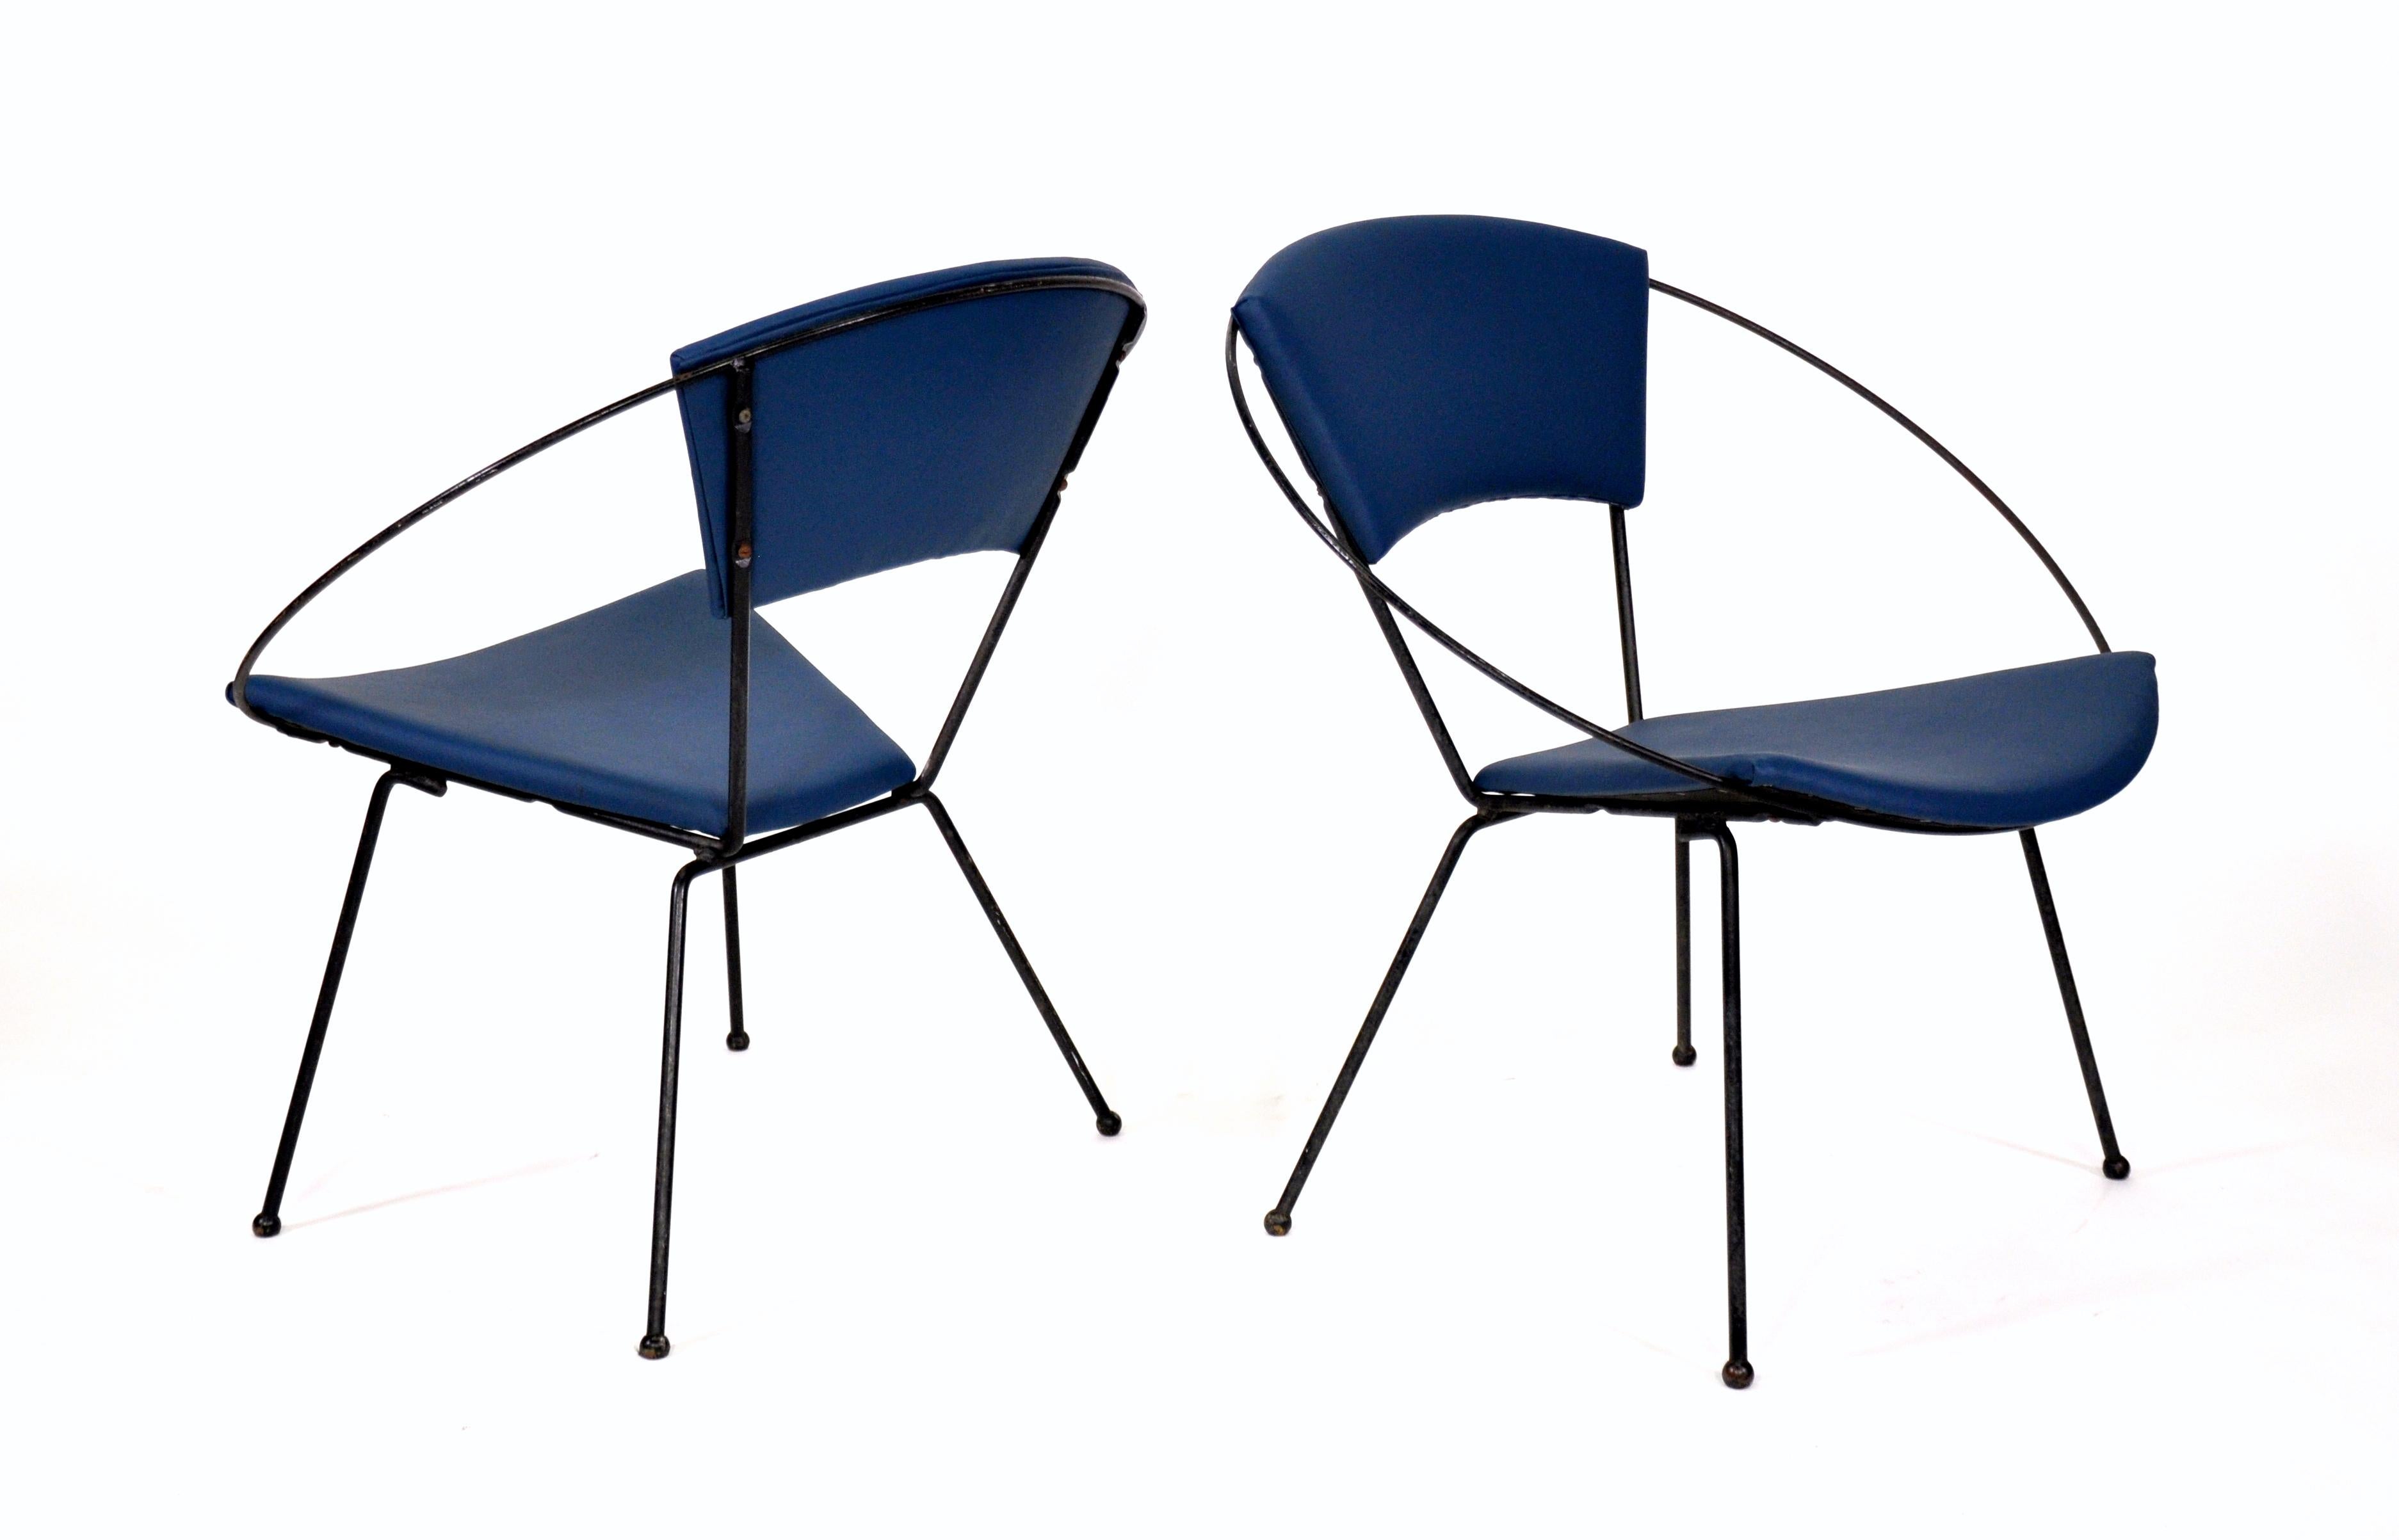 Faux Leather Pair of Mid-Century Black Iron Hoop Chairs by Cicchelli for Reilly-Wolff, 1950s